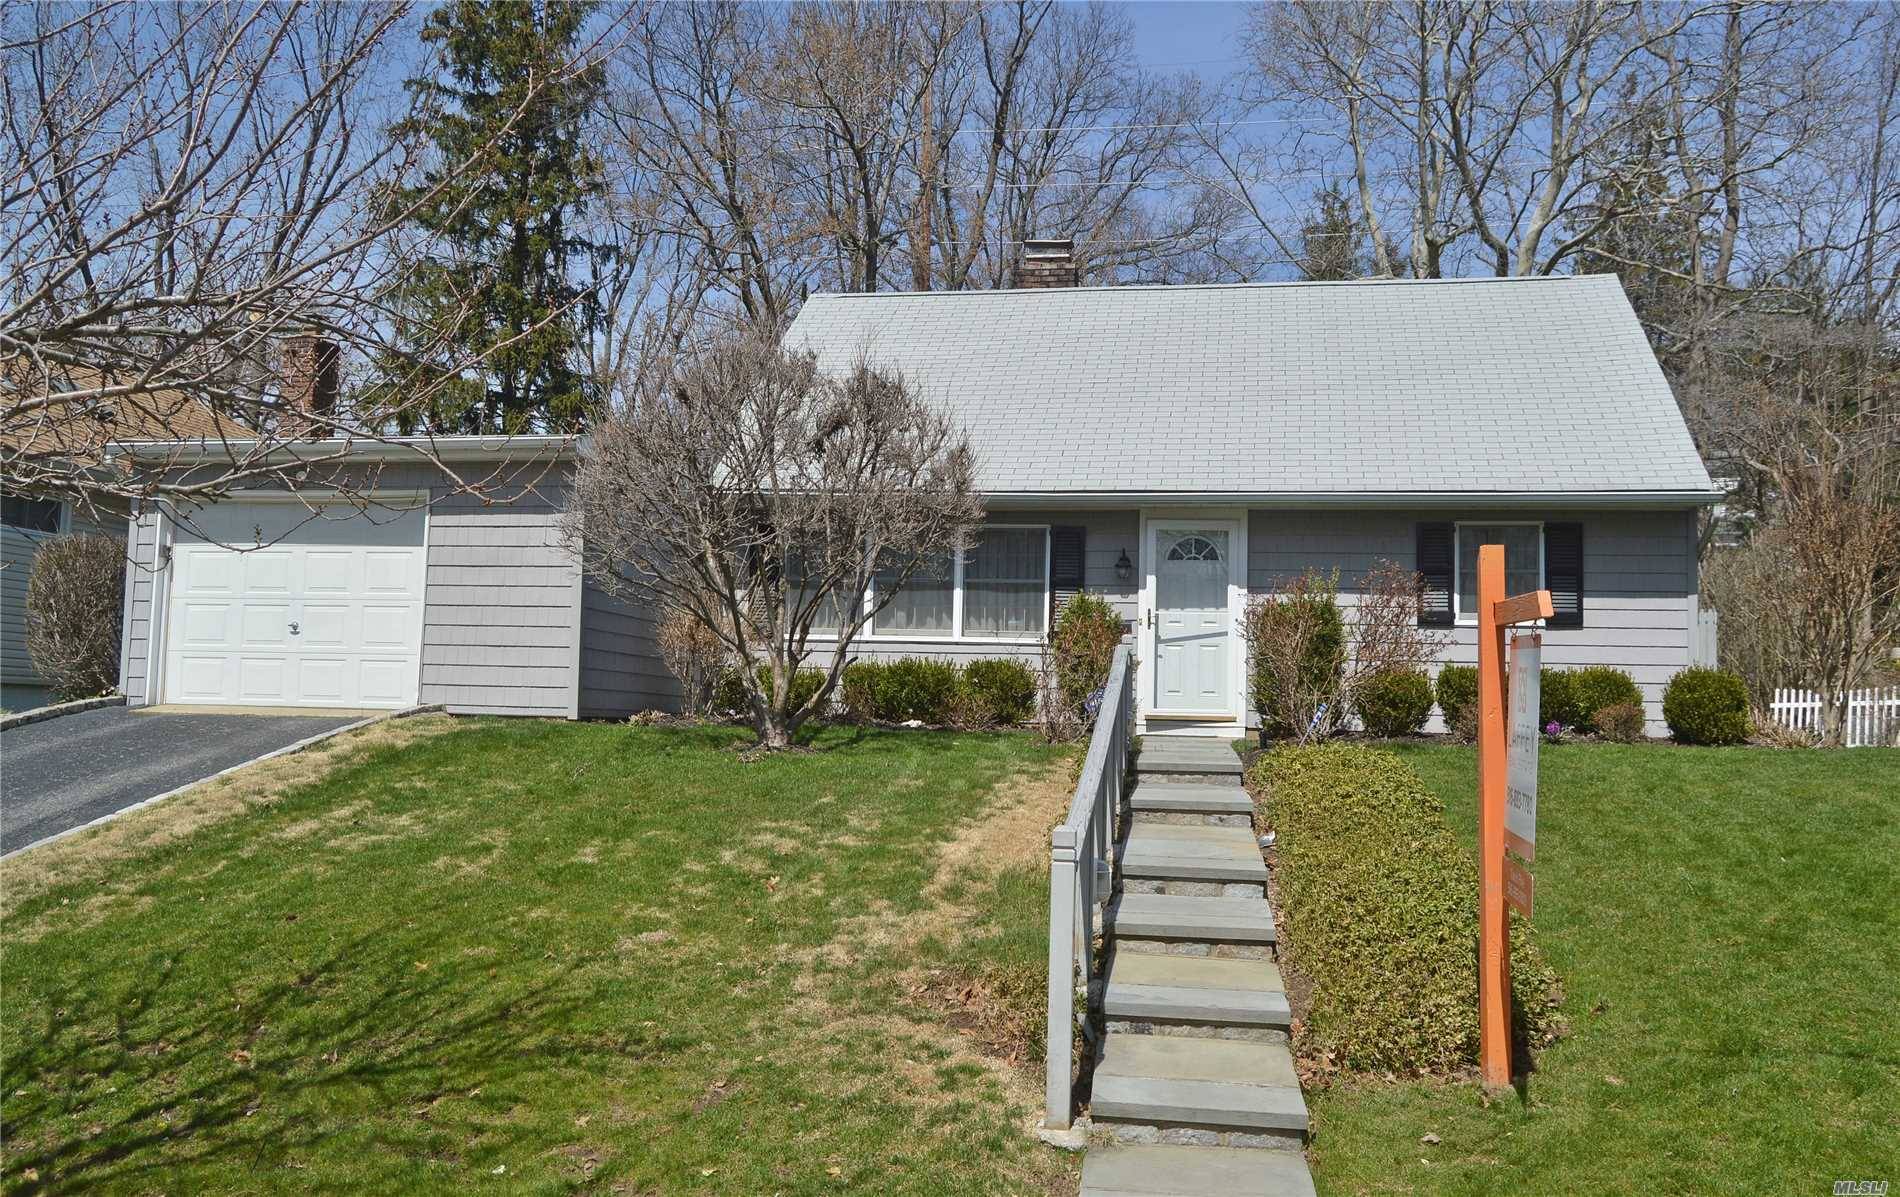 Come And See A Beautiful South Salem Cape That Has Been Lovingly Maintained, Expanded And Updated By One Family, Since They Purchased It In 1949.